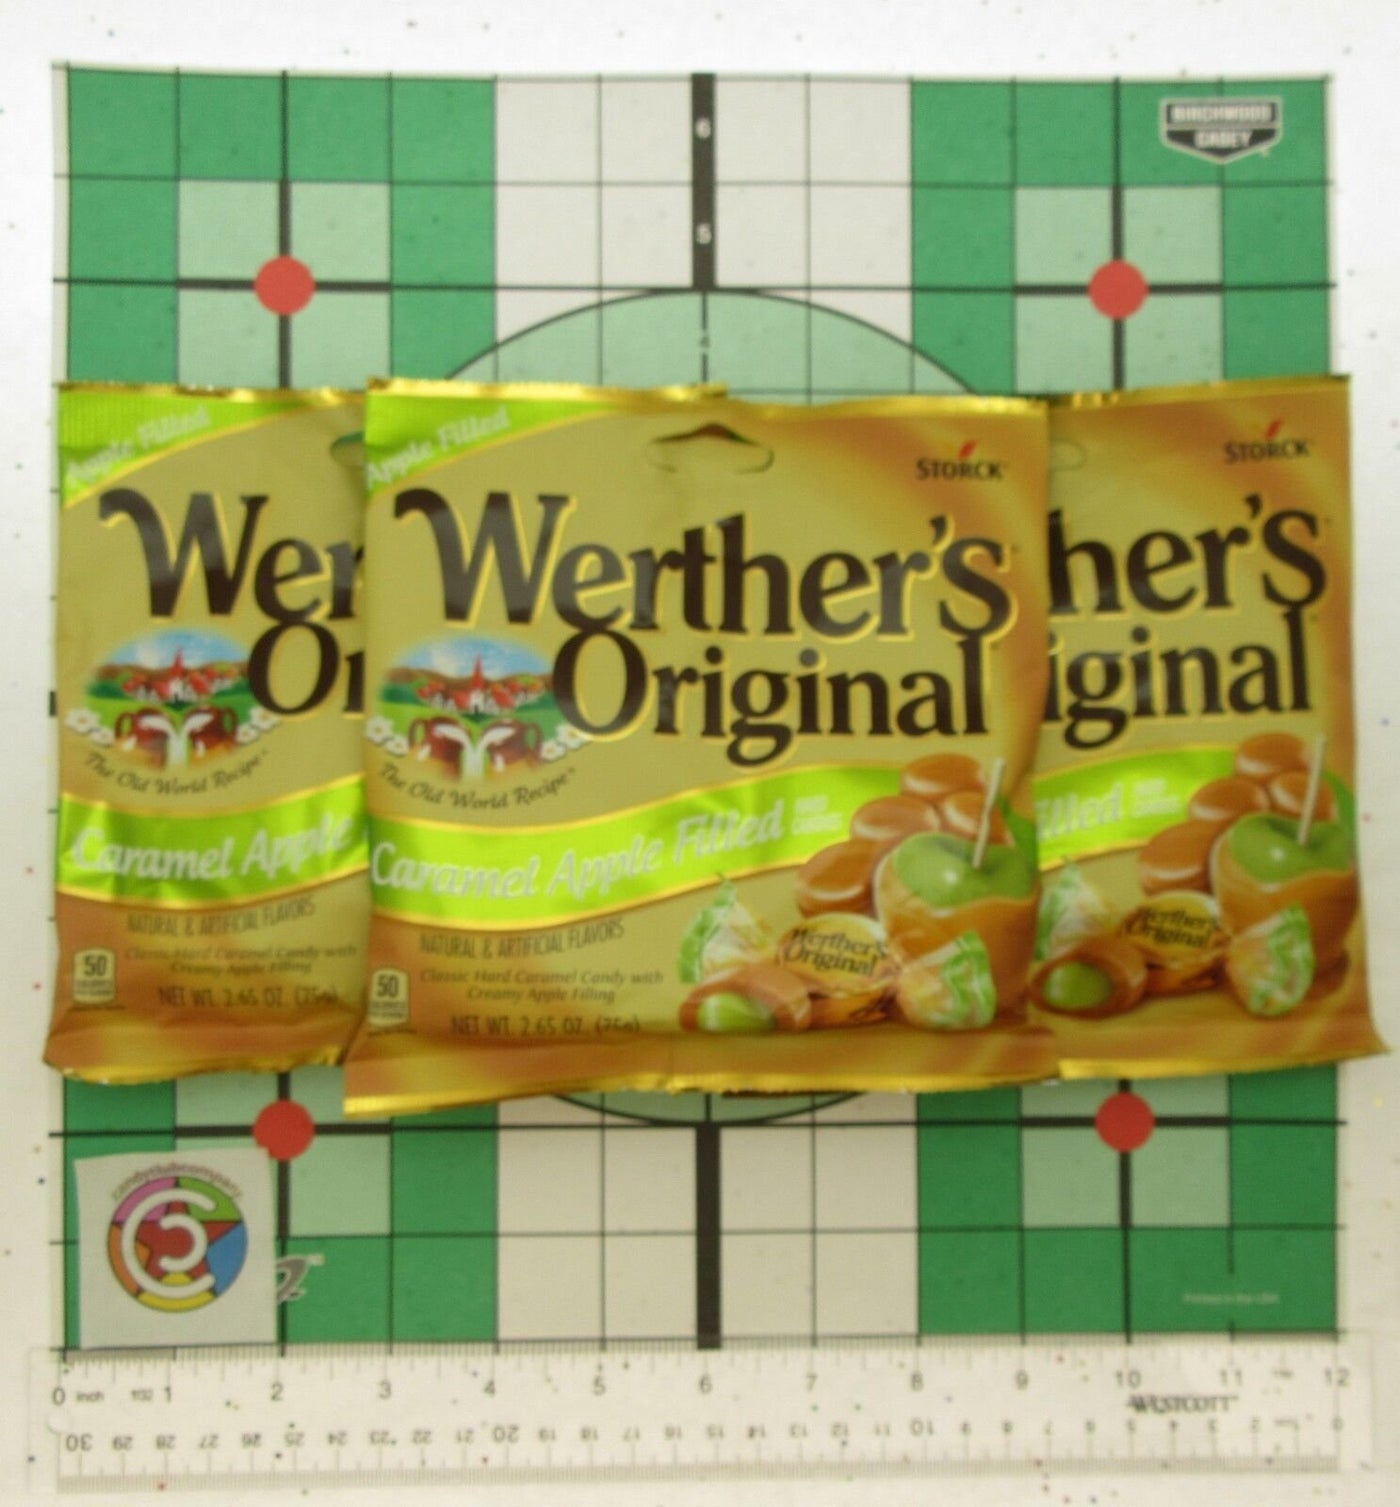 Werther's Original Caramel Apple Filled 2.65oz Bags Werthers Candies ~ Lot of 3